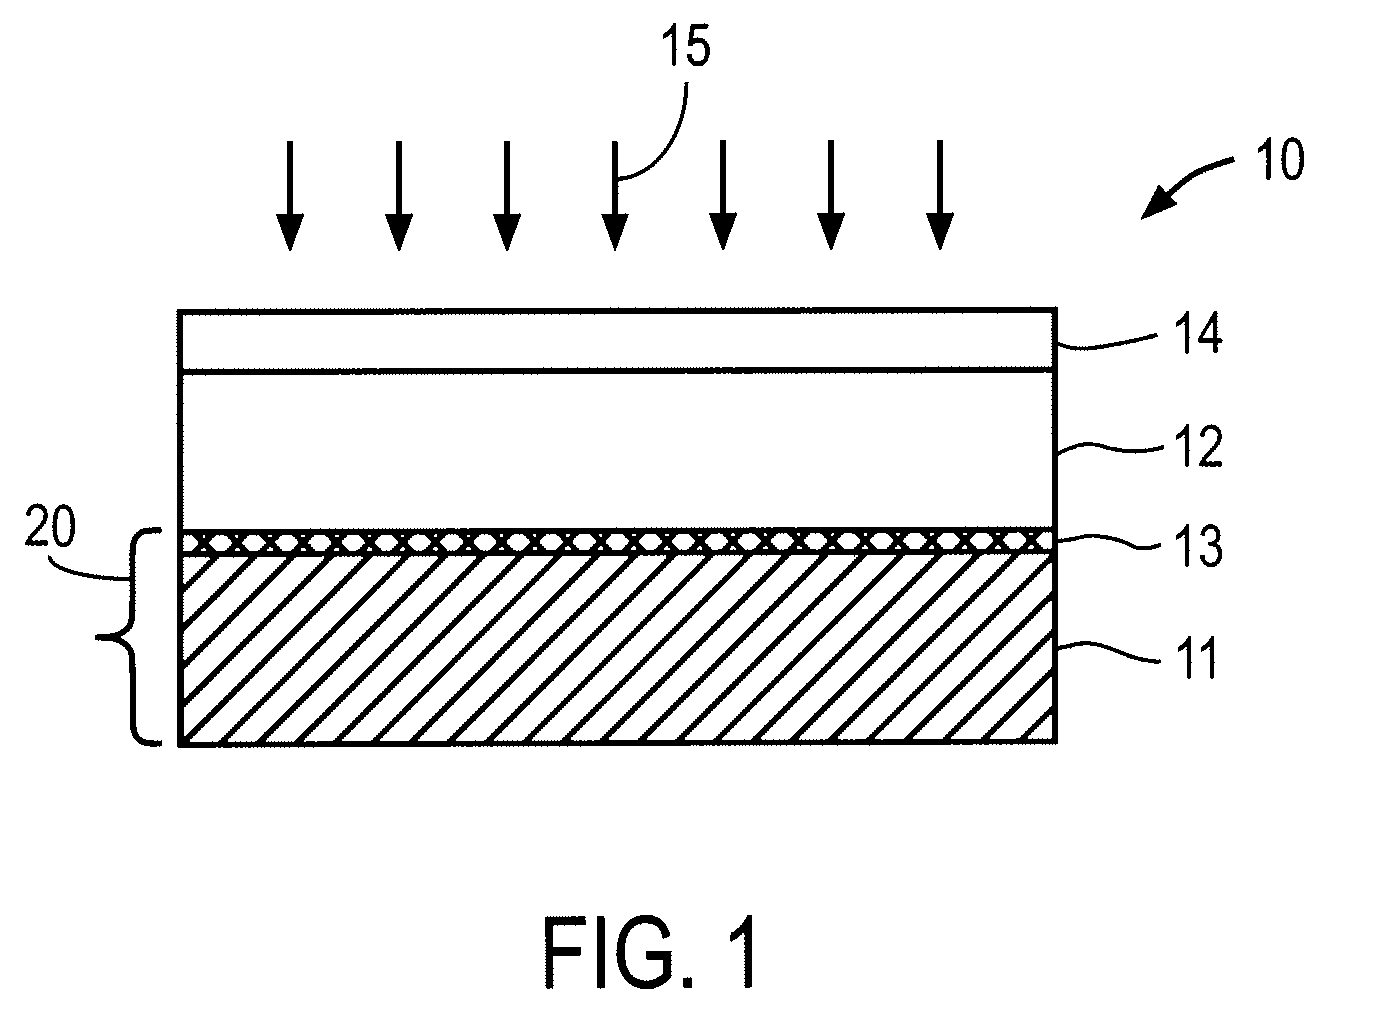 Reliable thin film photovoltaic module structures